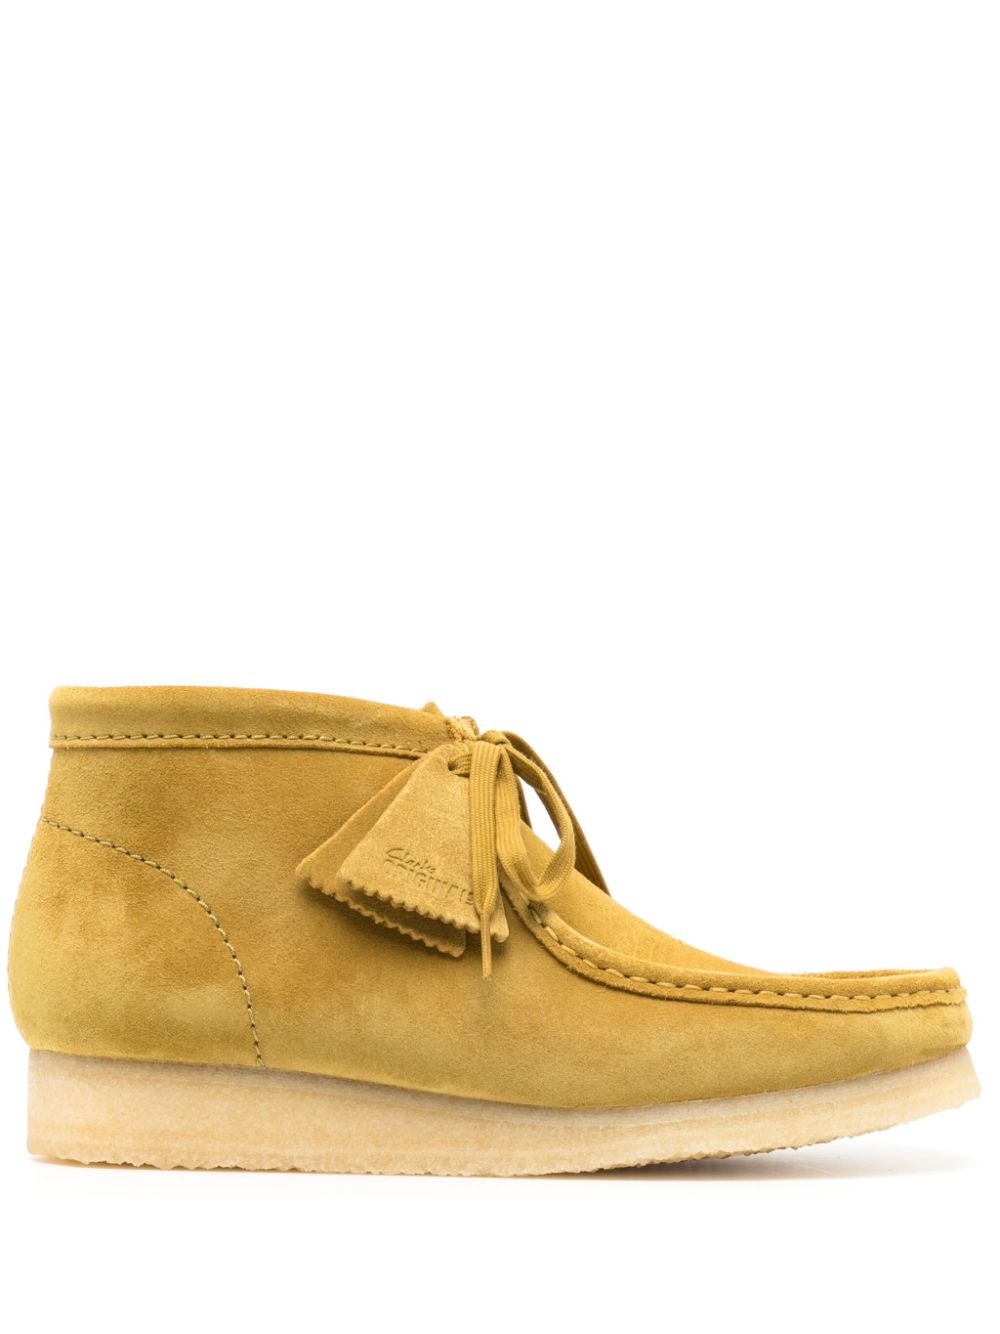 CLARKS WALLABEE SUEDE BOOTS